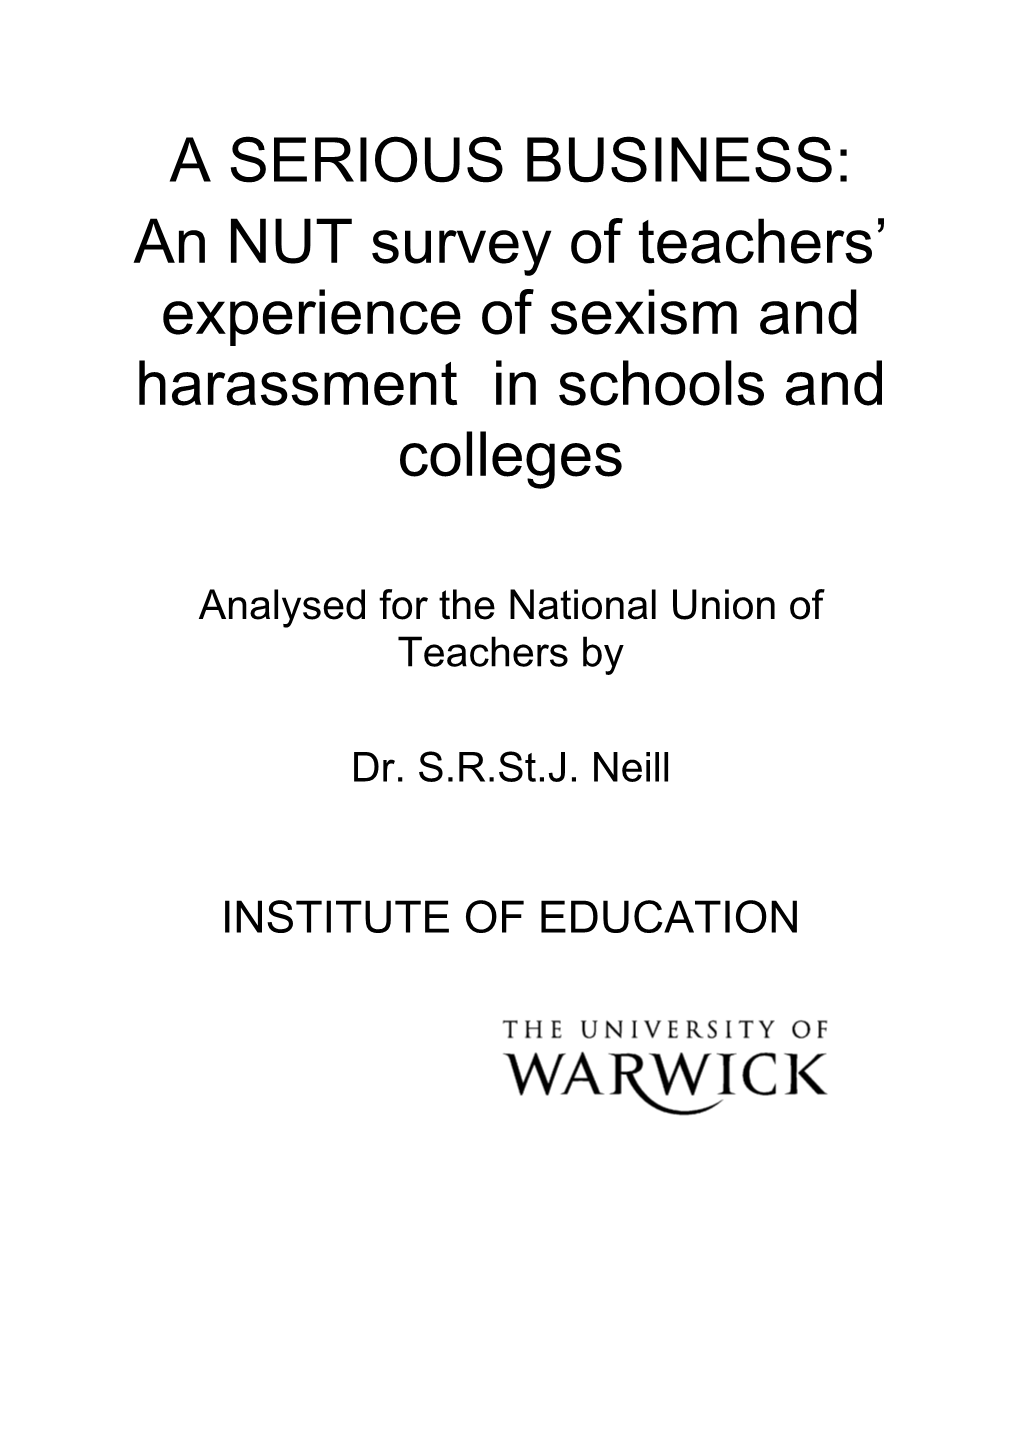 A SERIOUS BUSINESS: an NUT Survey of Teachers’ Experience of Sexism and Harassment in Schools and Colleges